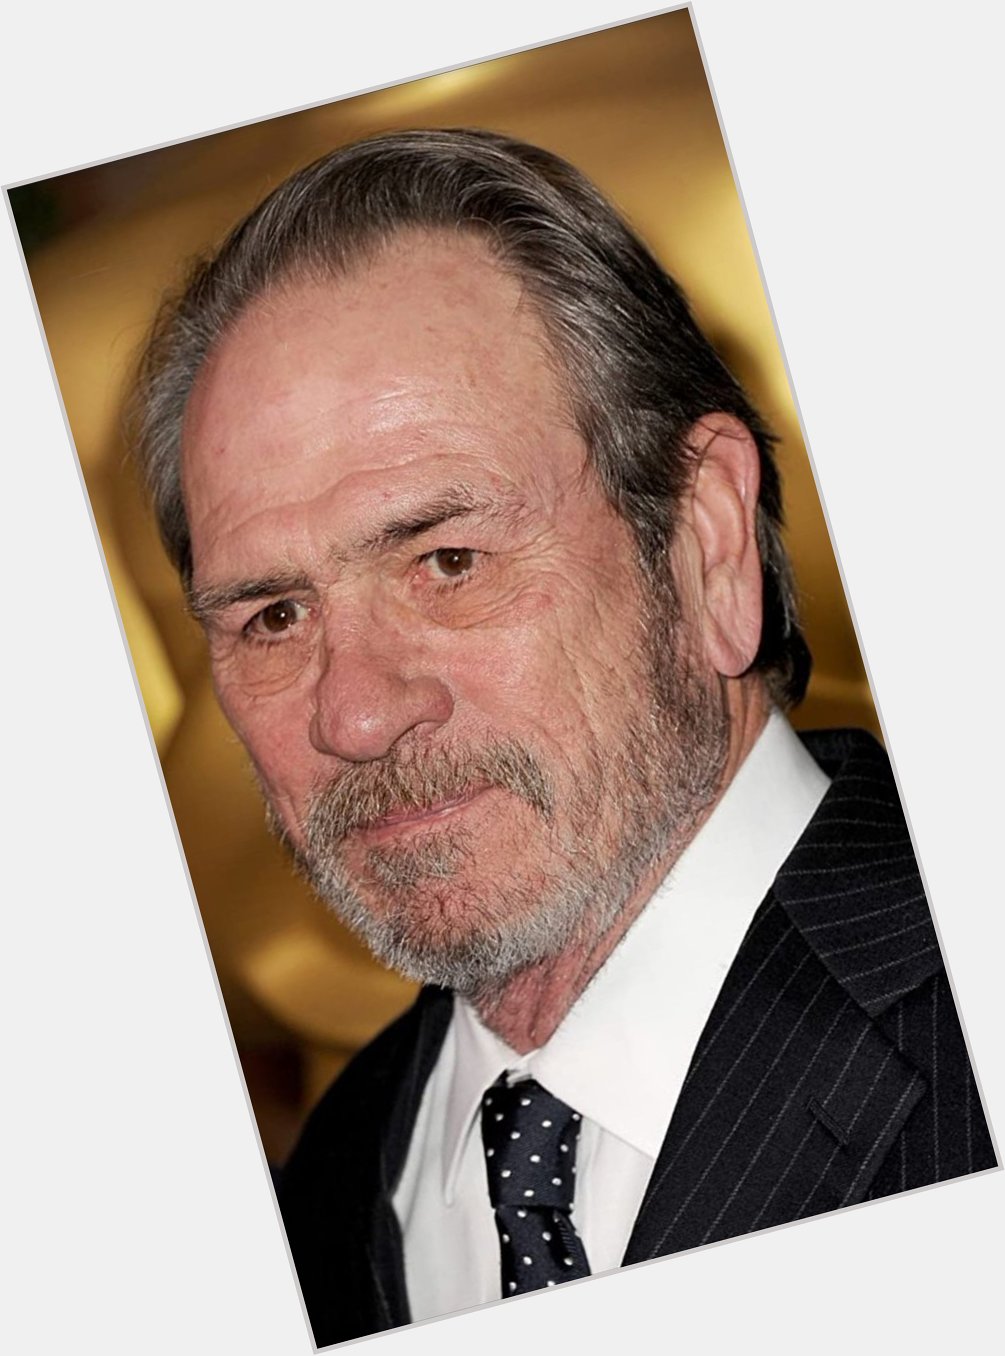 Happy birthday to the MAN, the MYTH, the LEGEND. Tommy Lee Jones. 